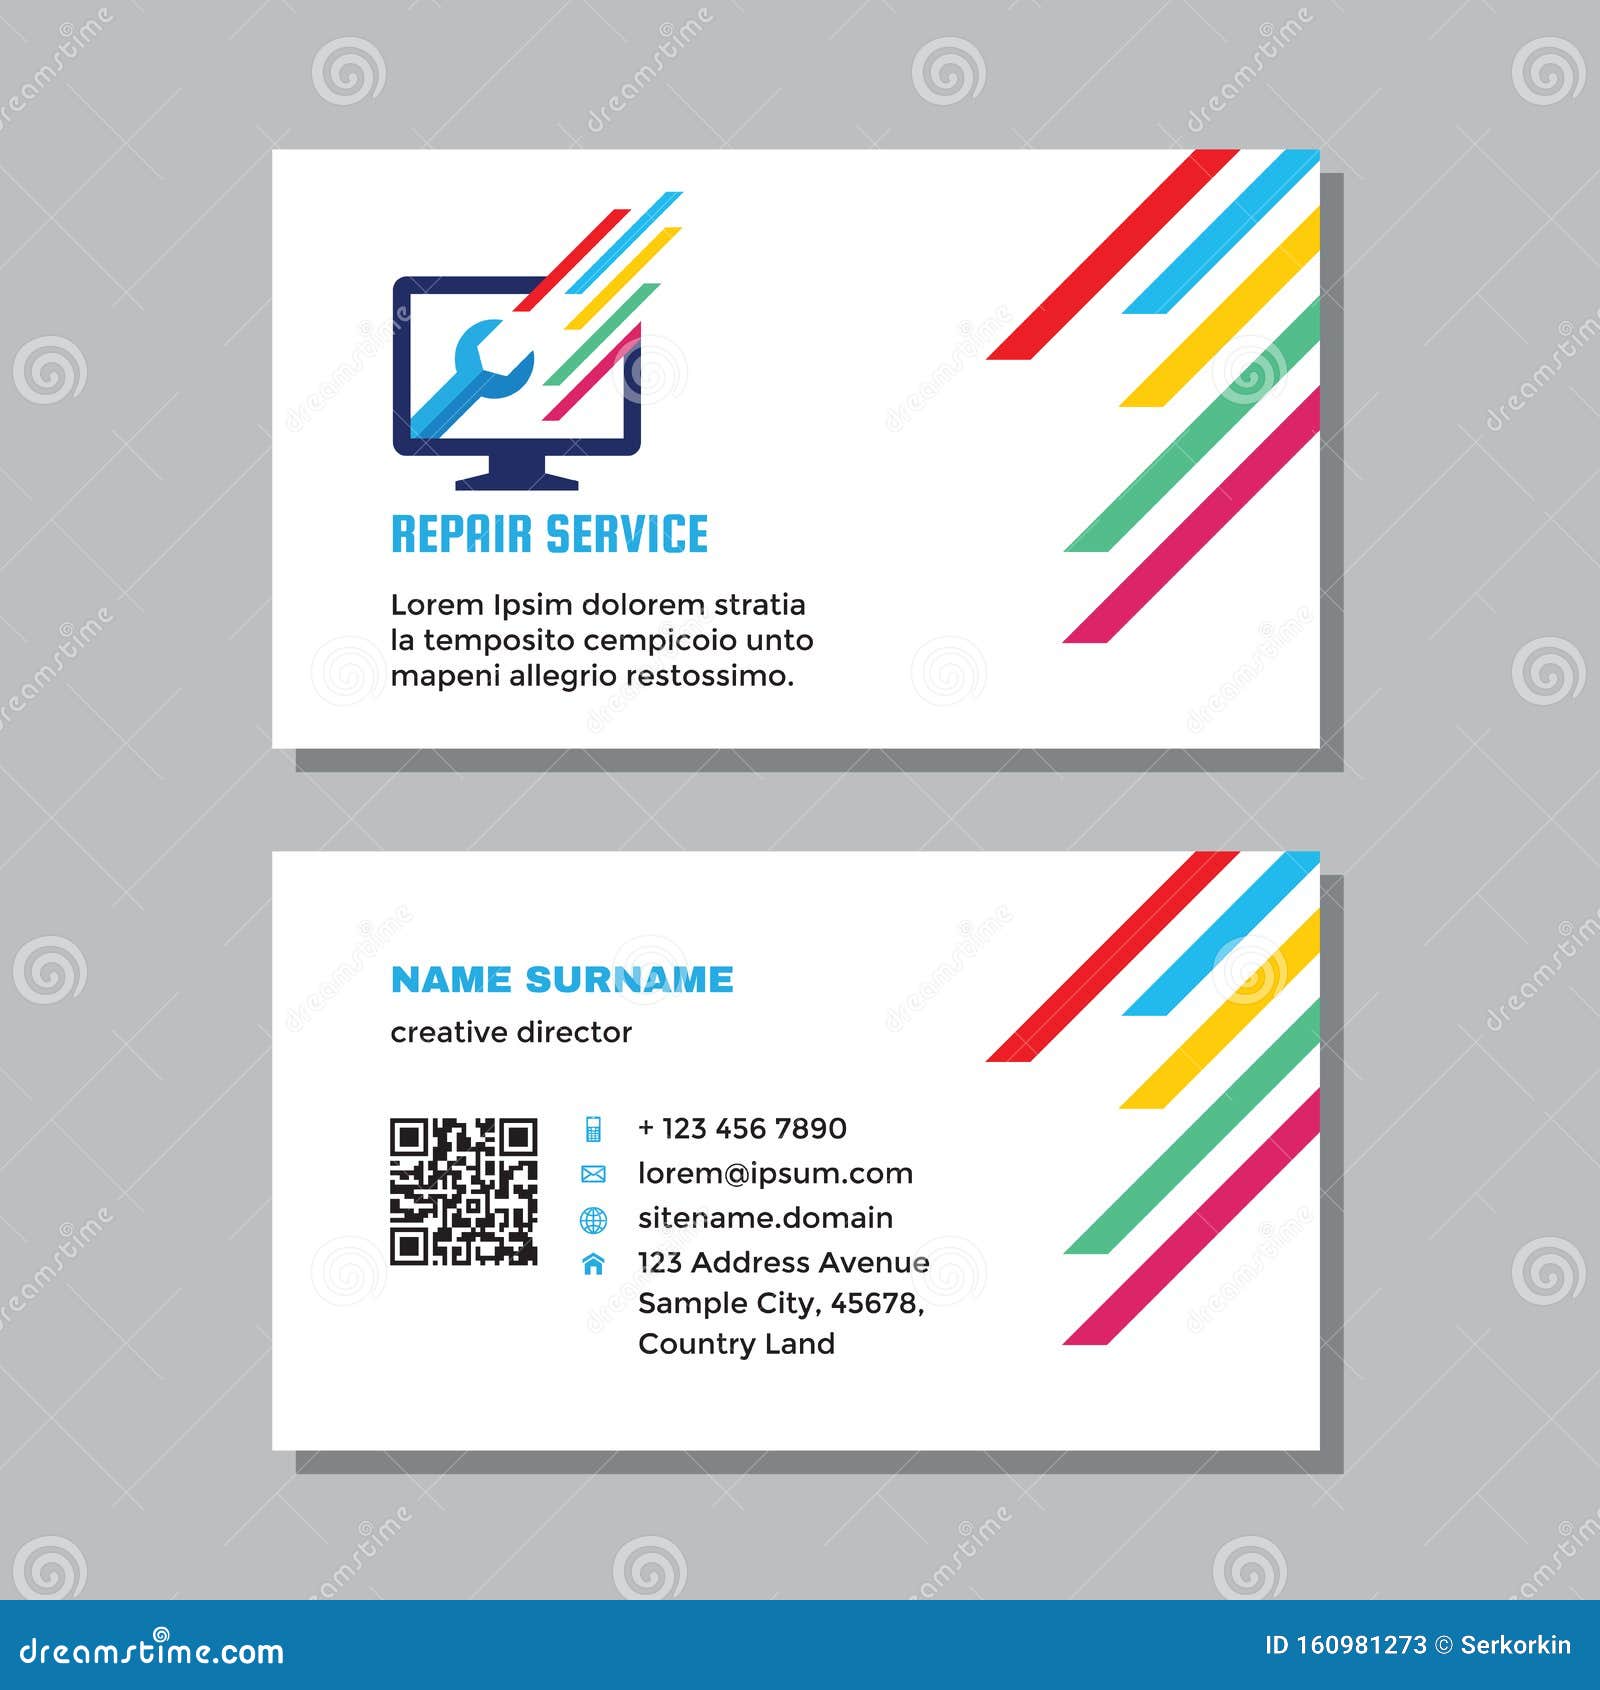 computer repair business cards templates free 6